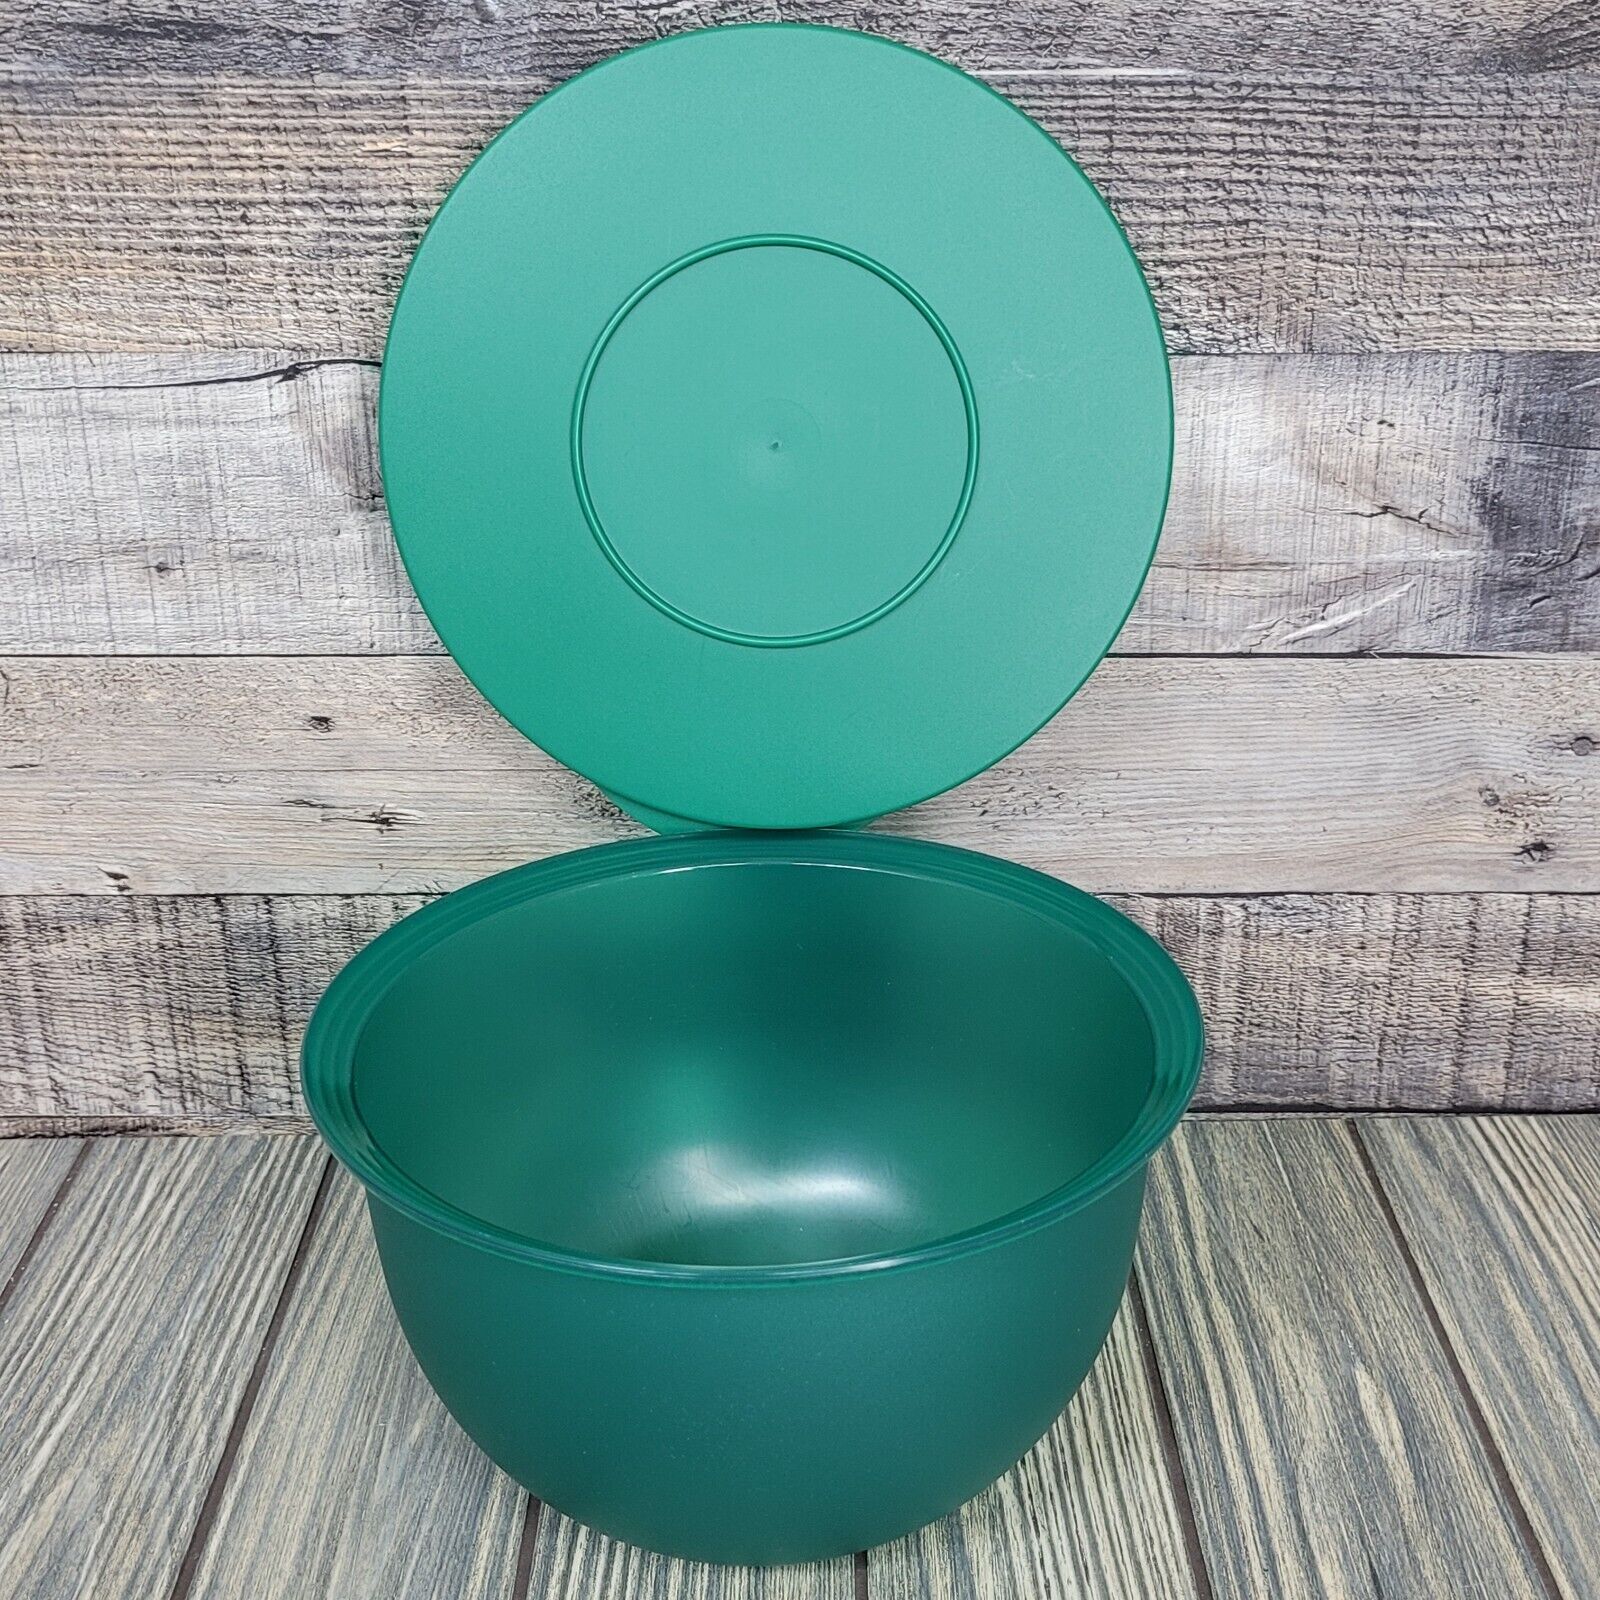 Tupperware Impressions 10 Cup Mixing Bowl Serving Container & Lid Green EUC 3093